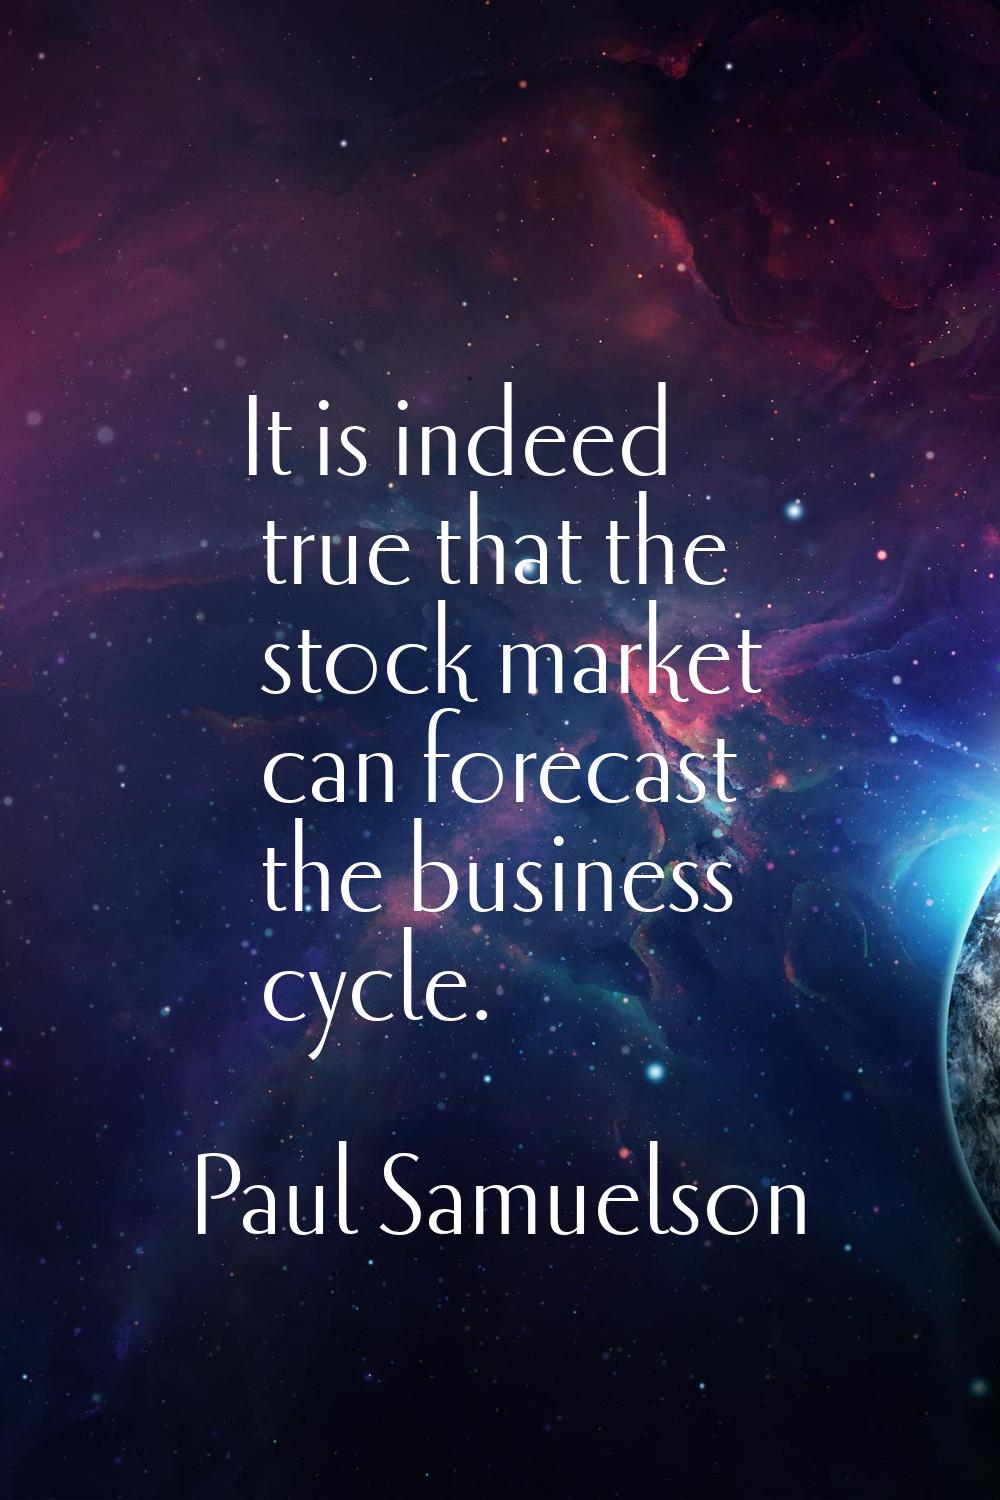 It is indeed true that the stock market can forecast the business cycle.